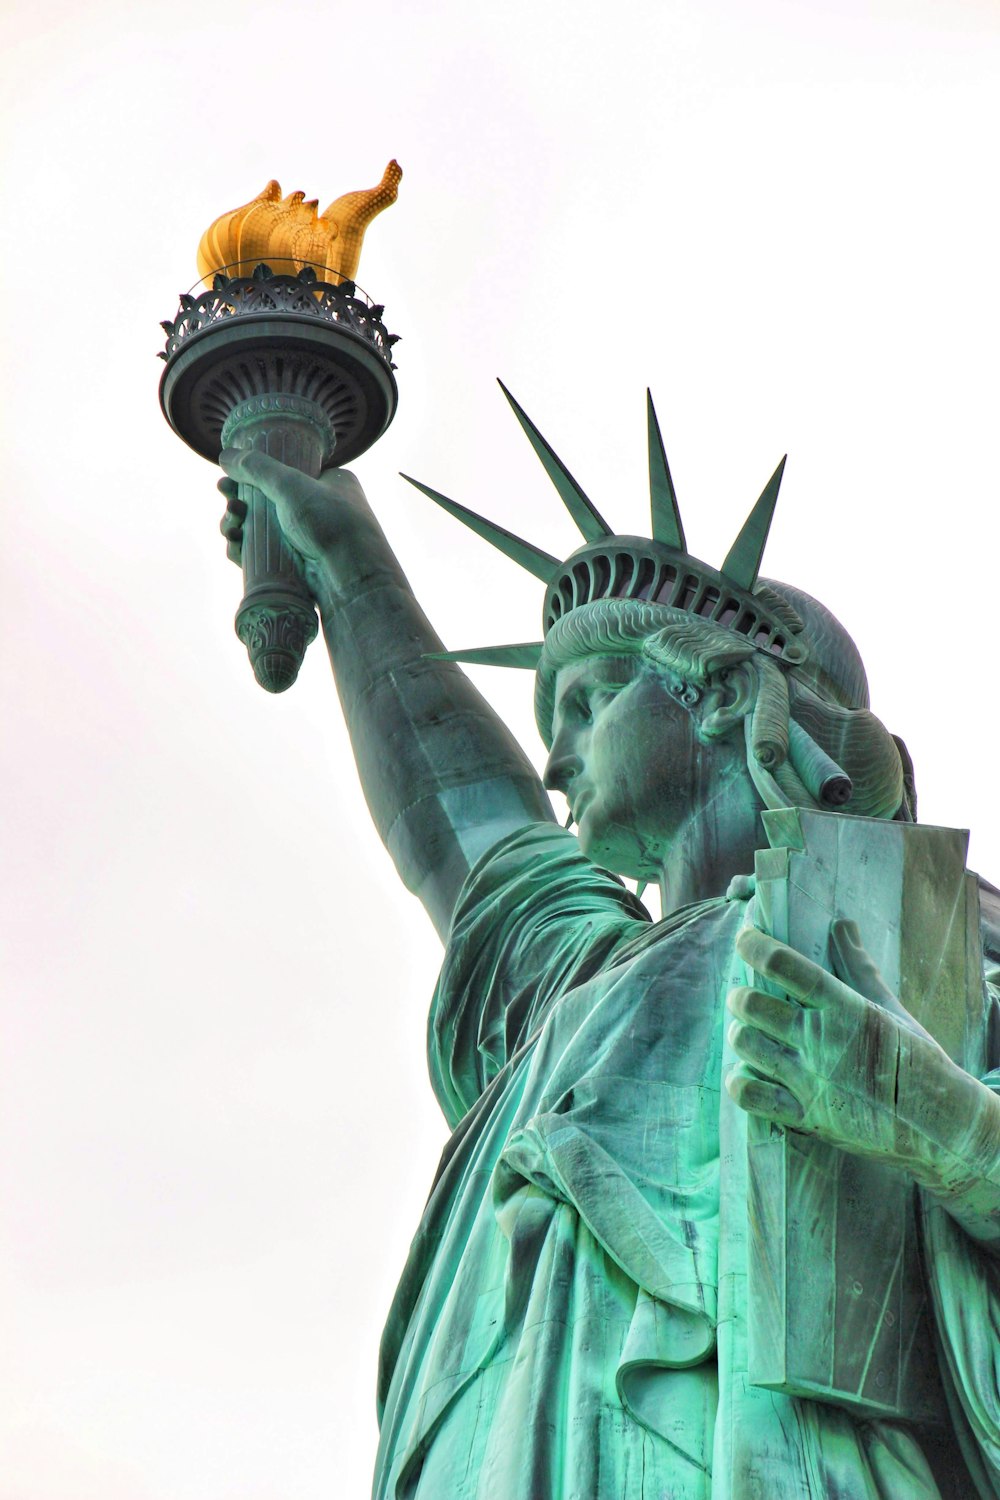 a statue of a person holding a torch with Statue of Liberty in the background